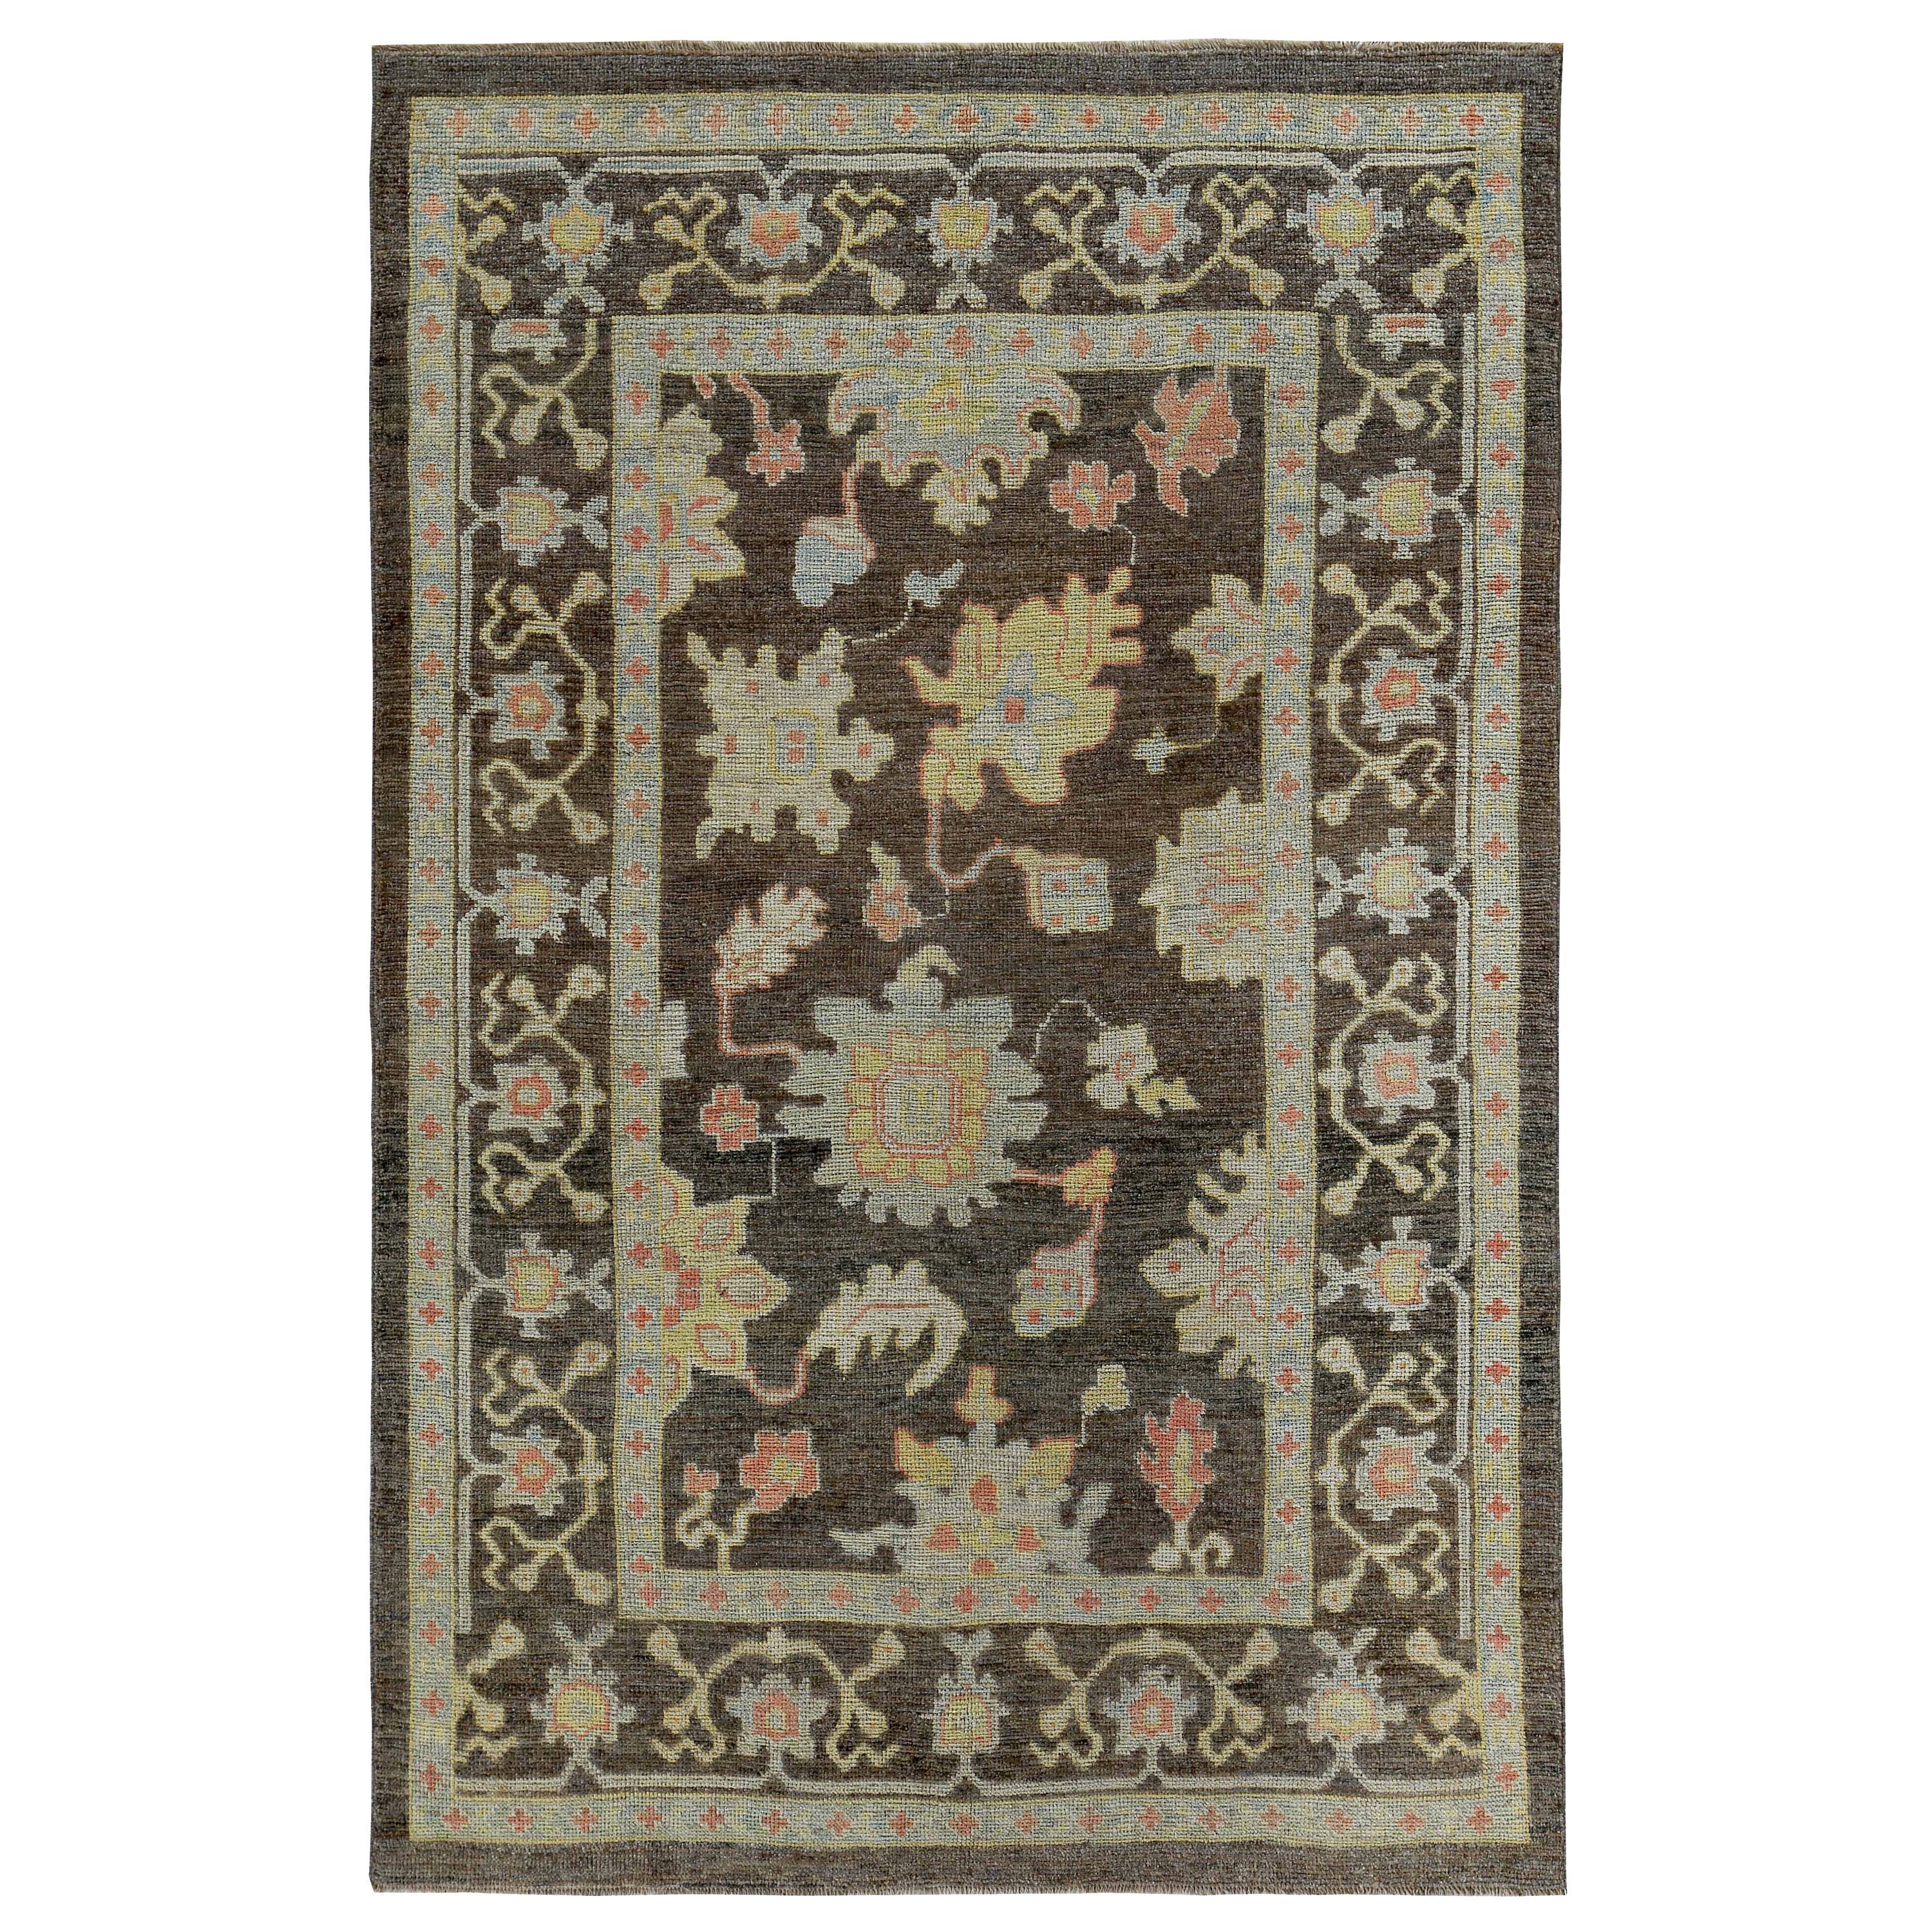 New Turkish Oushak Rug with Pink & Blue Floral Details on Brown Field For Sale